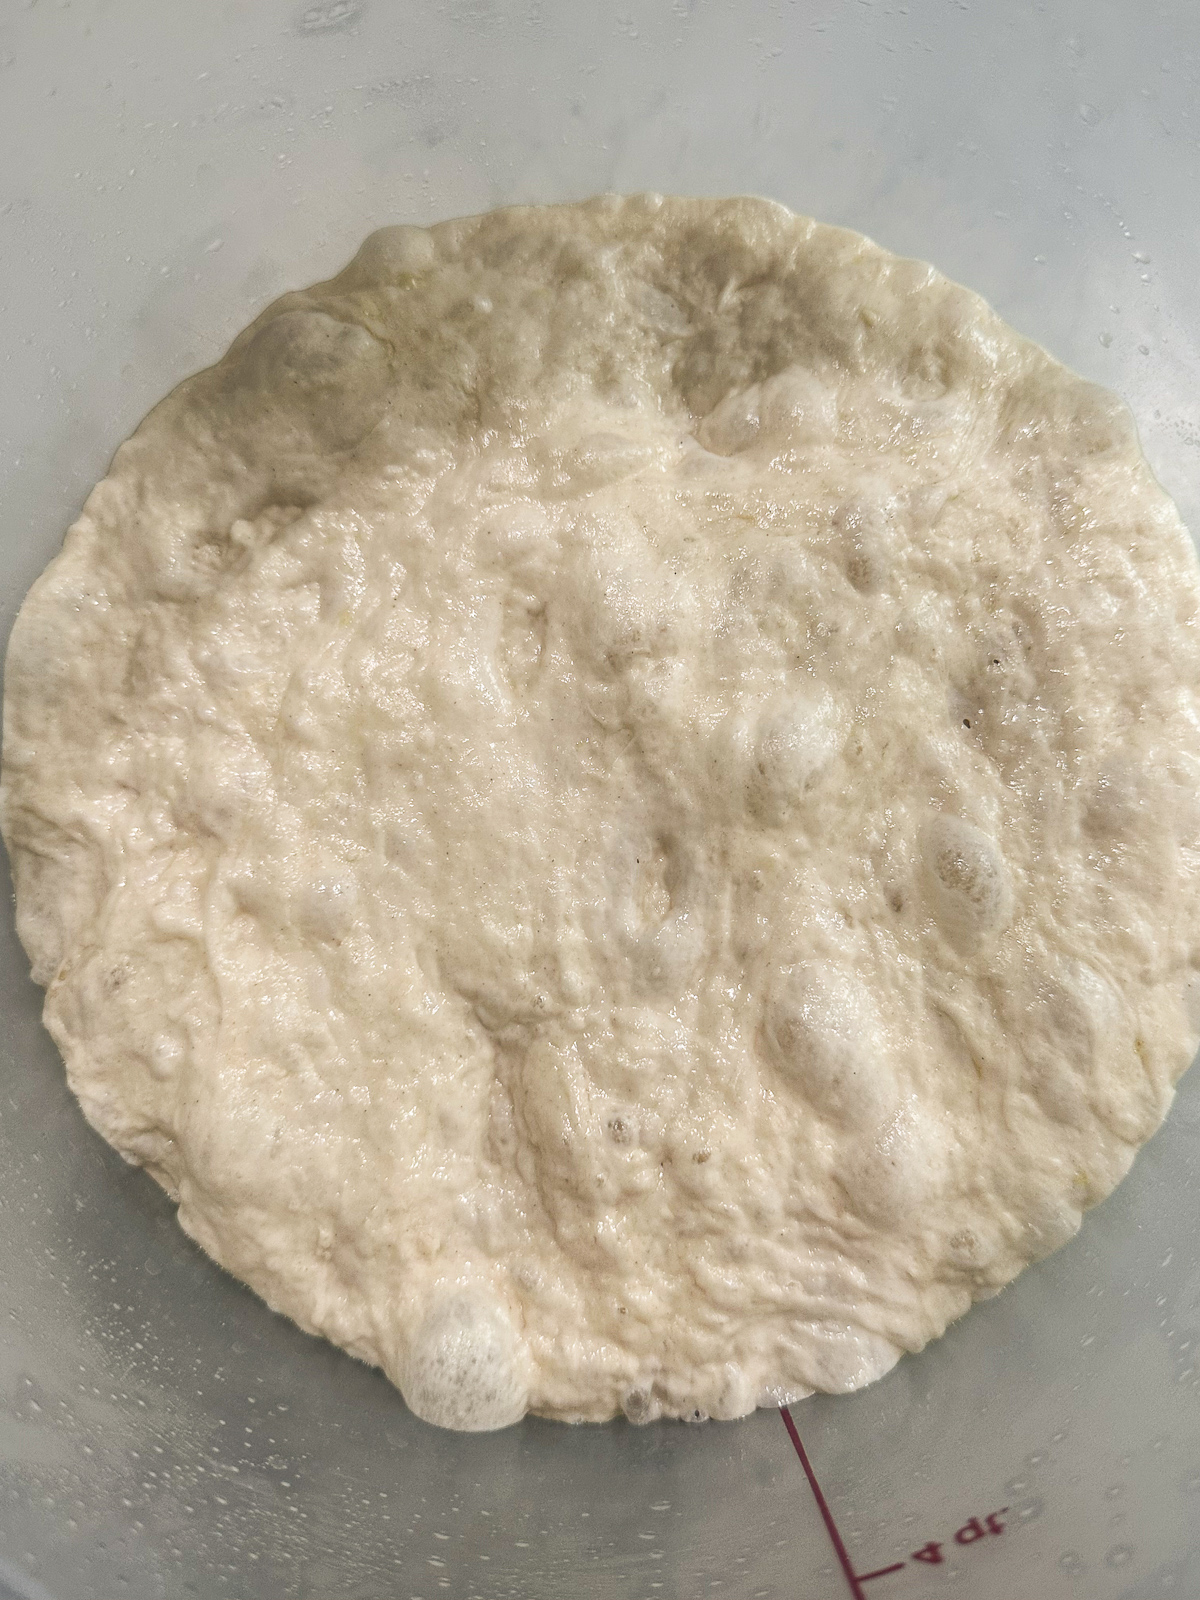 24 hour fermented pizza dough in bucket